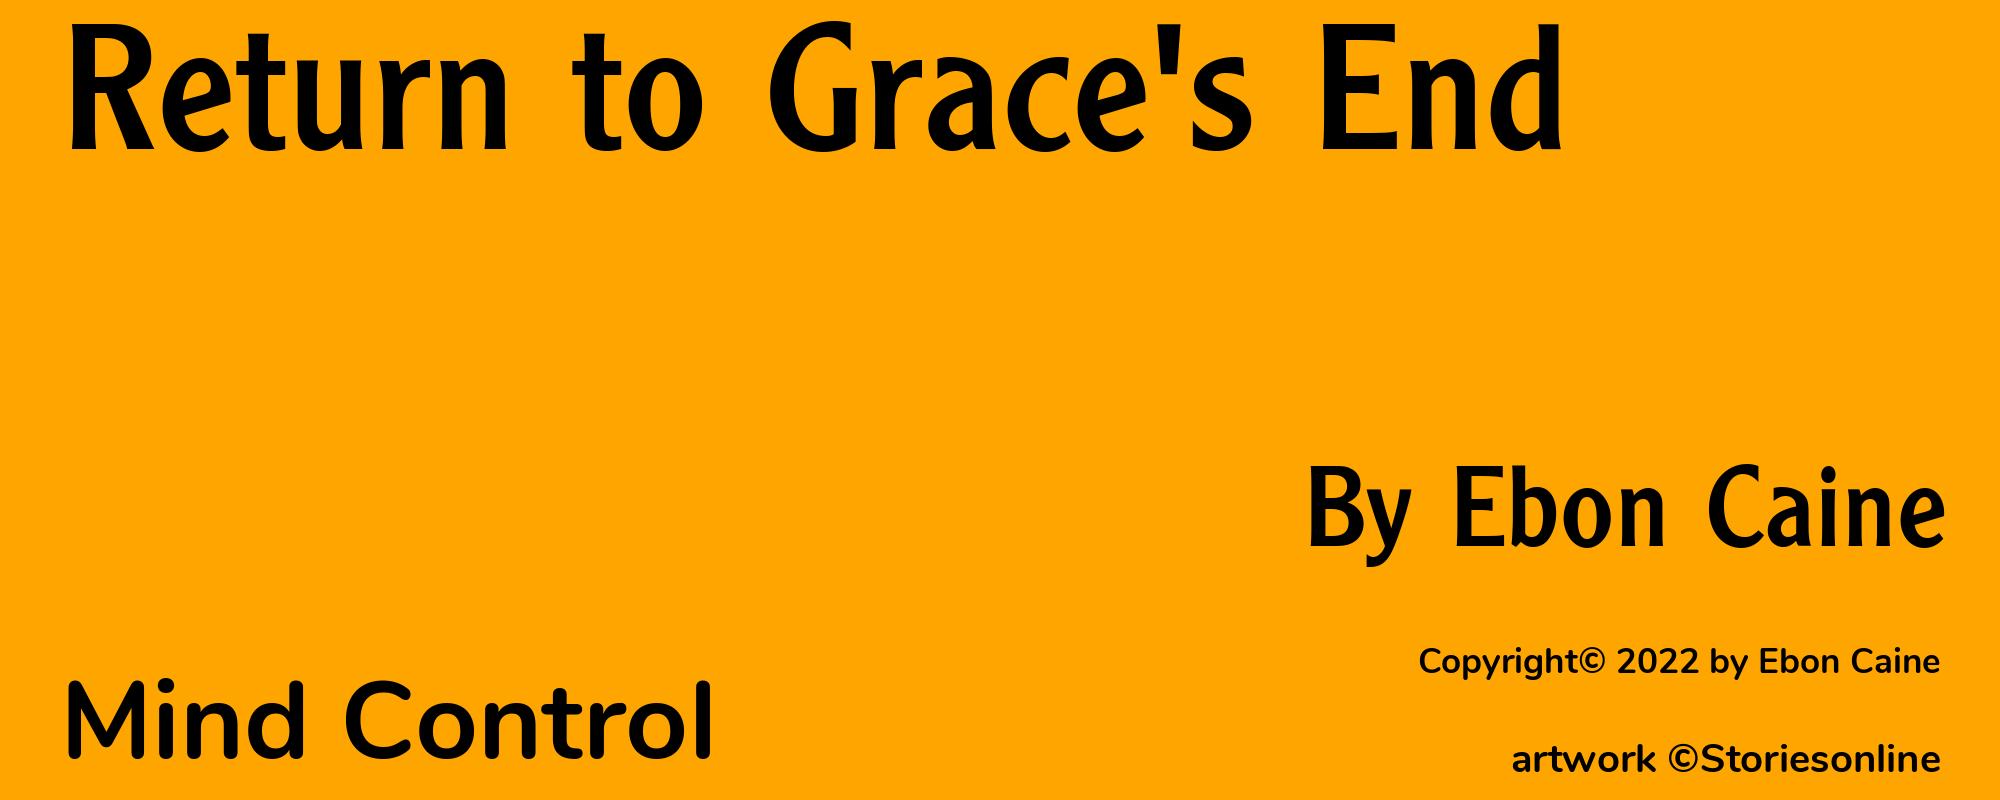 Return to Grace's End - Cover